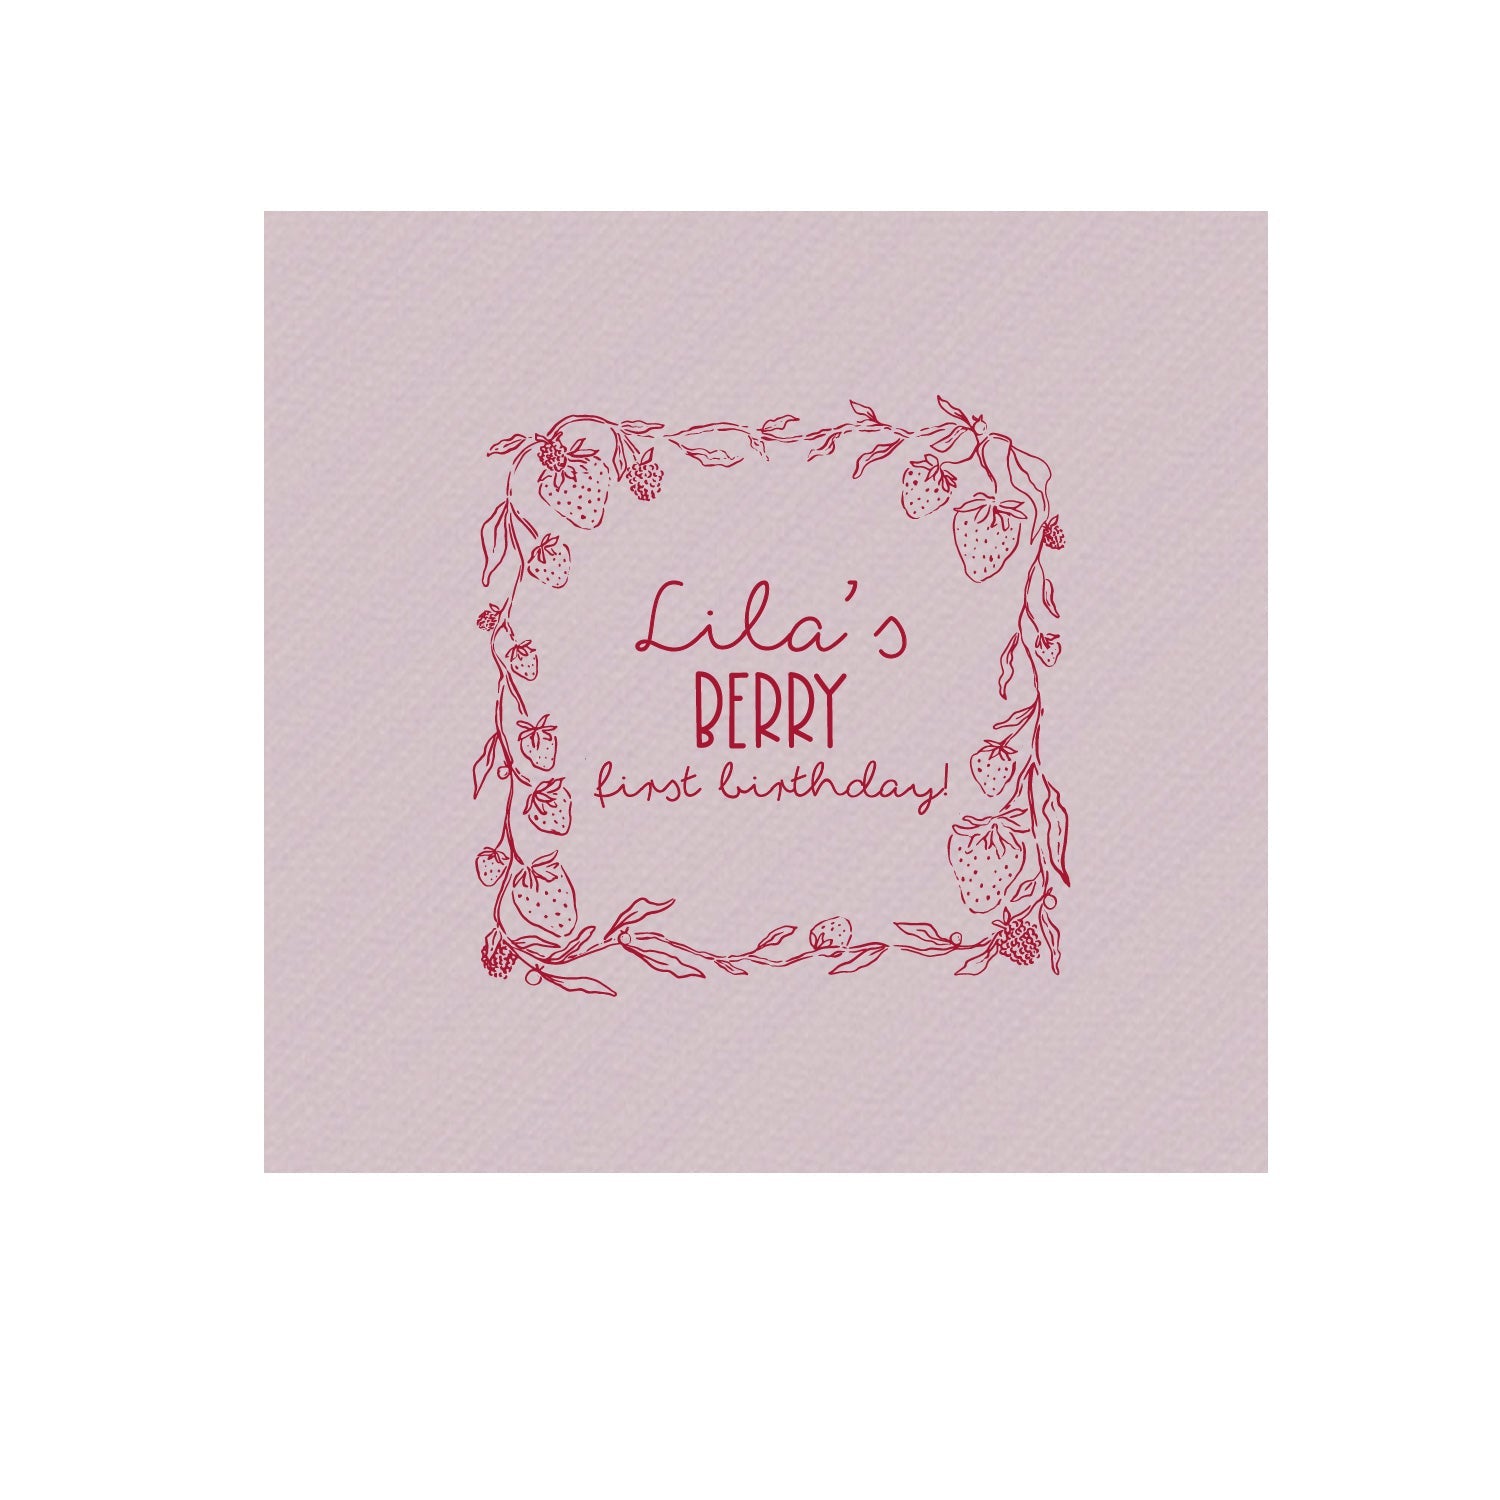 berry personalized cocktail napkins